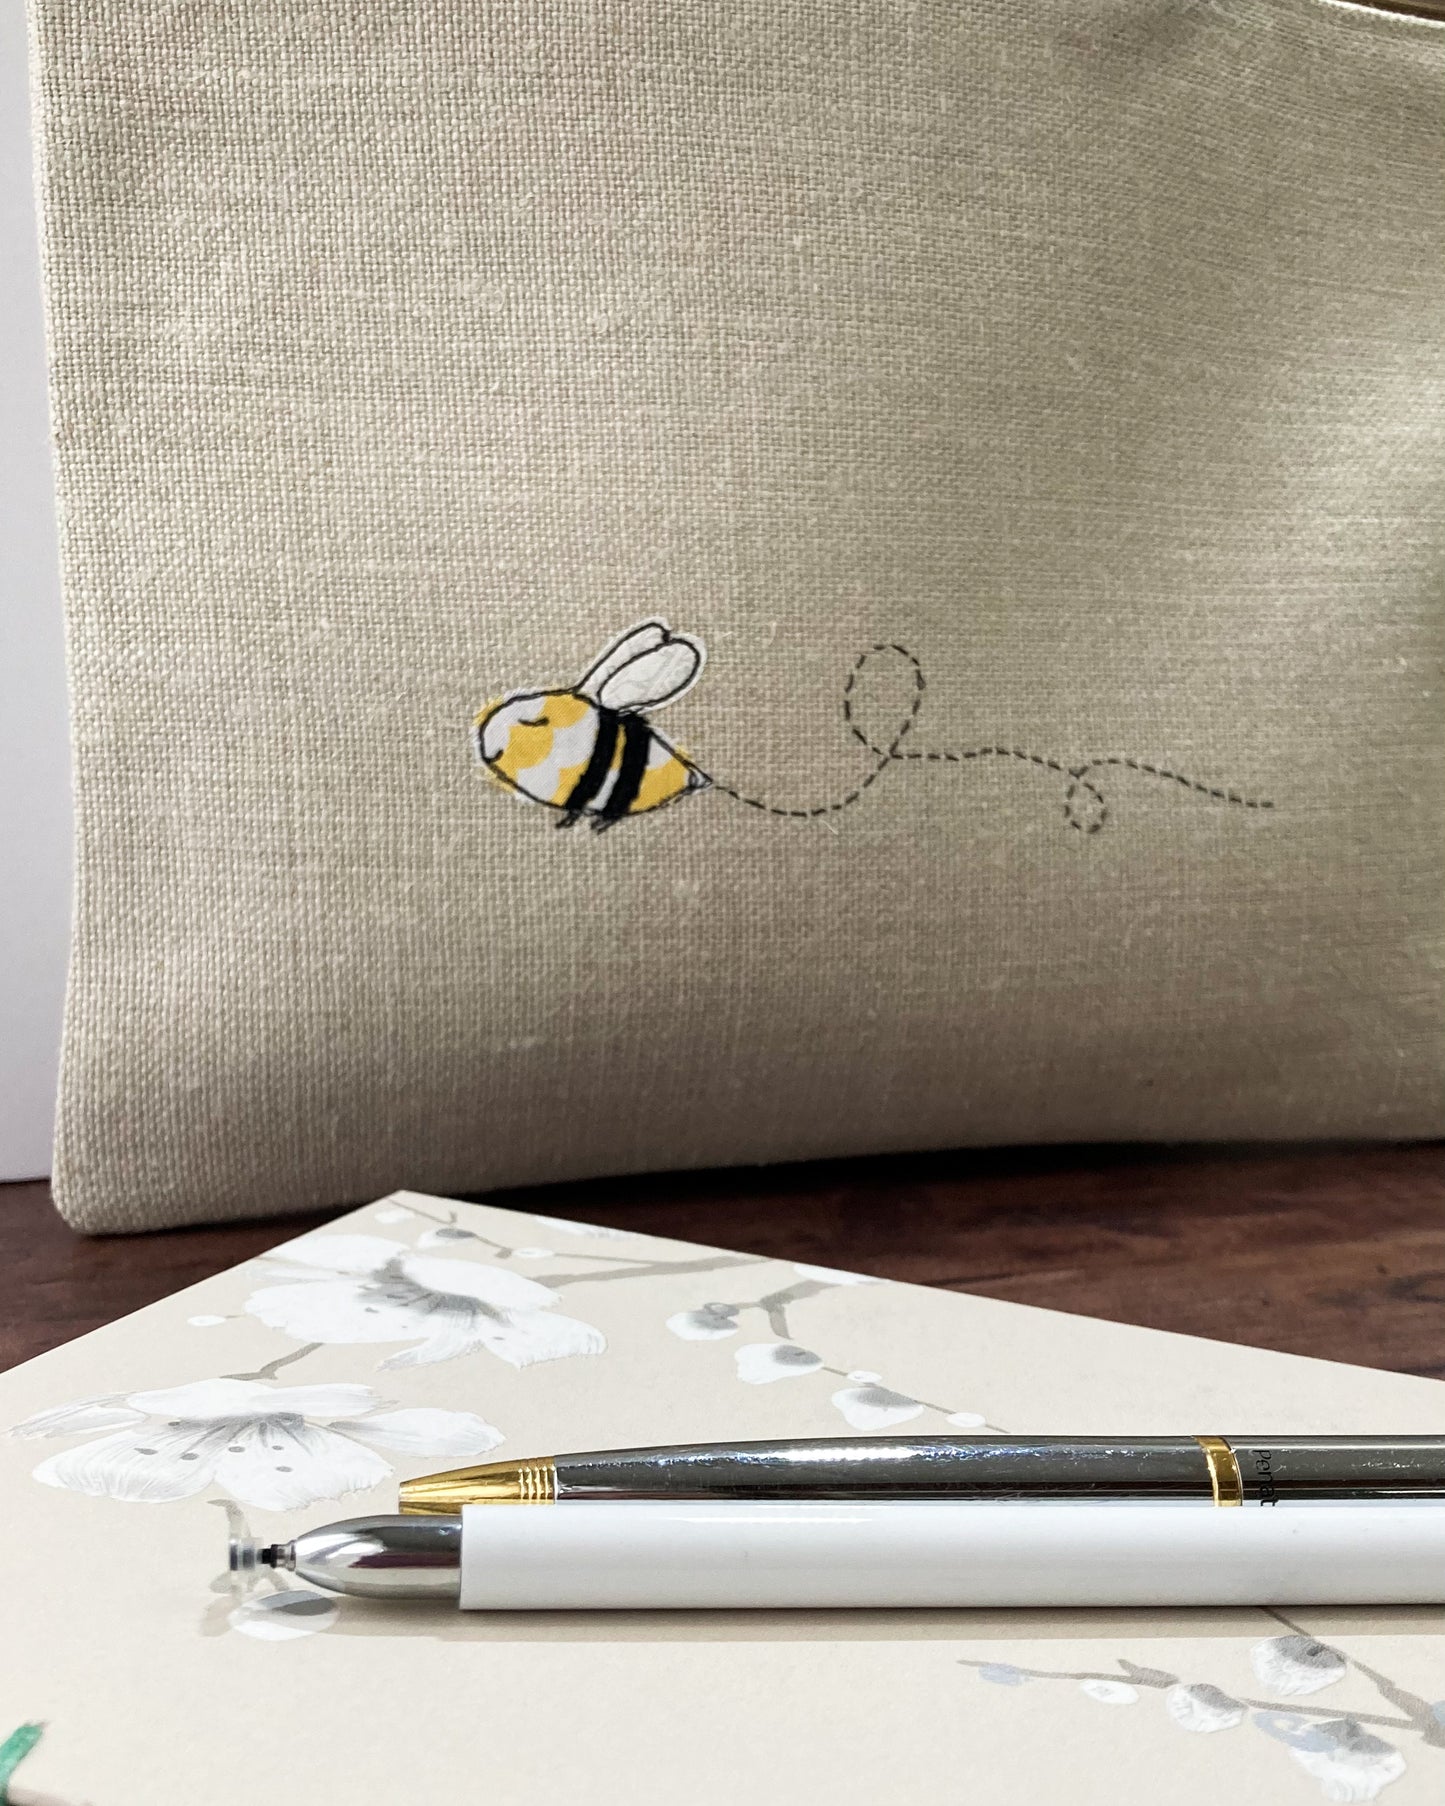 Embroidered Linen Happy-Bee Travel/Project Pouch